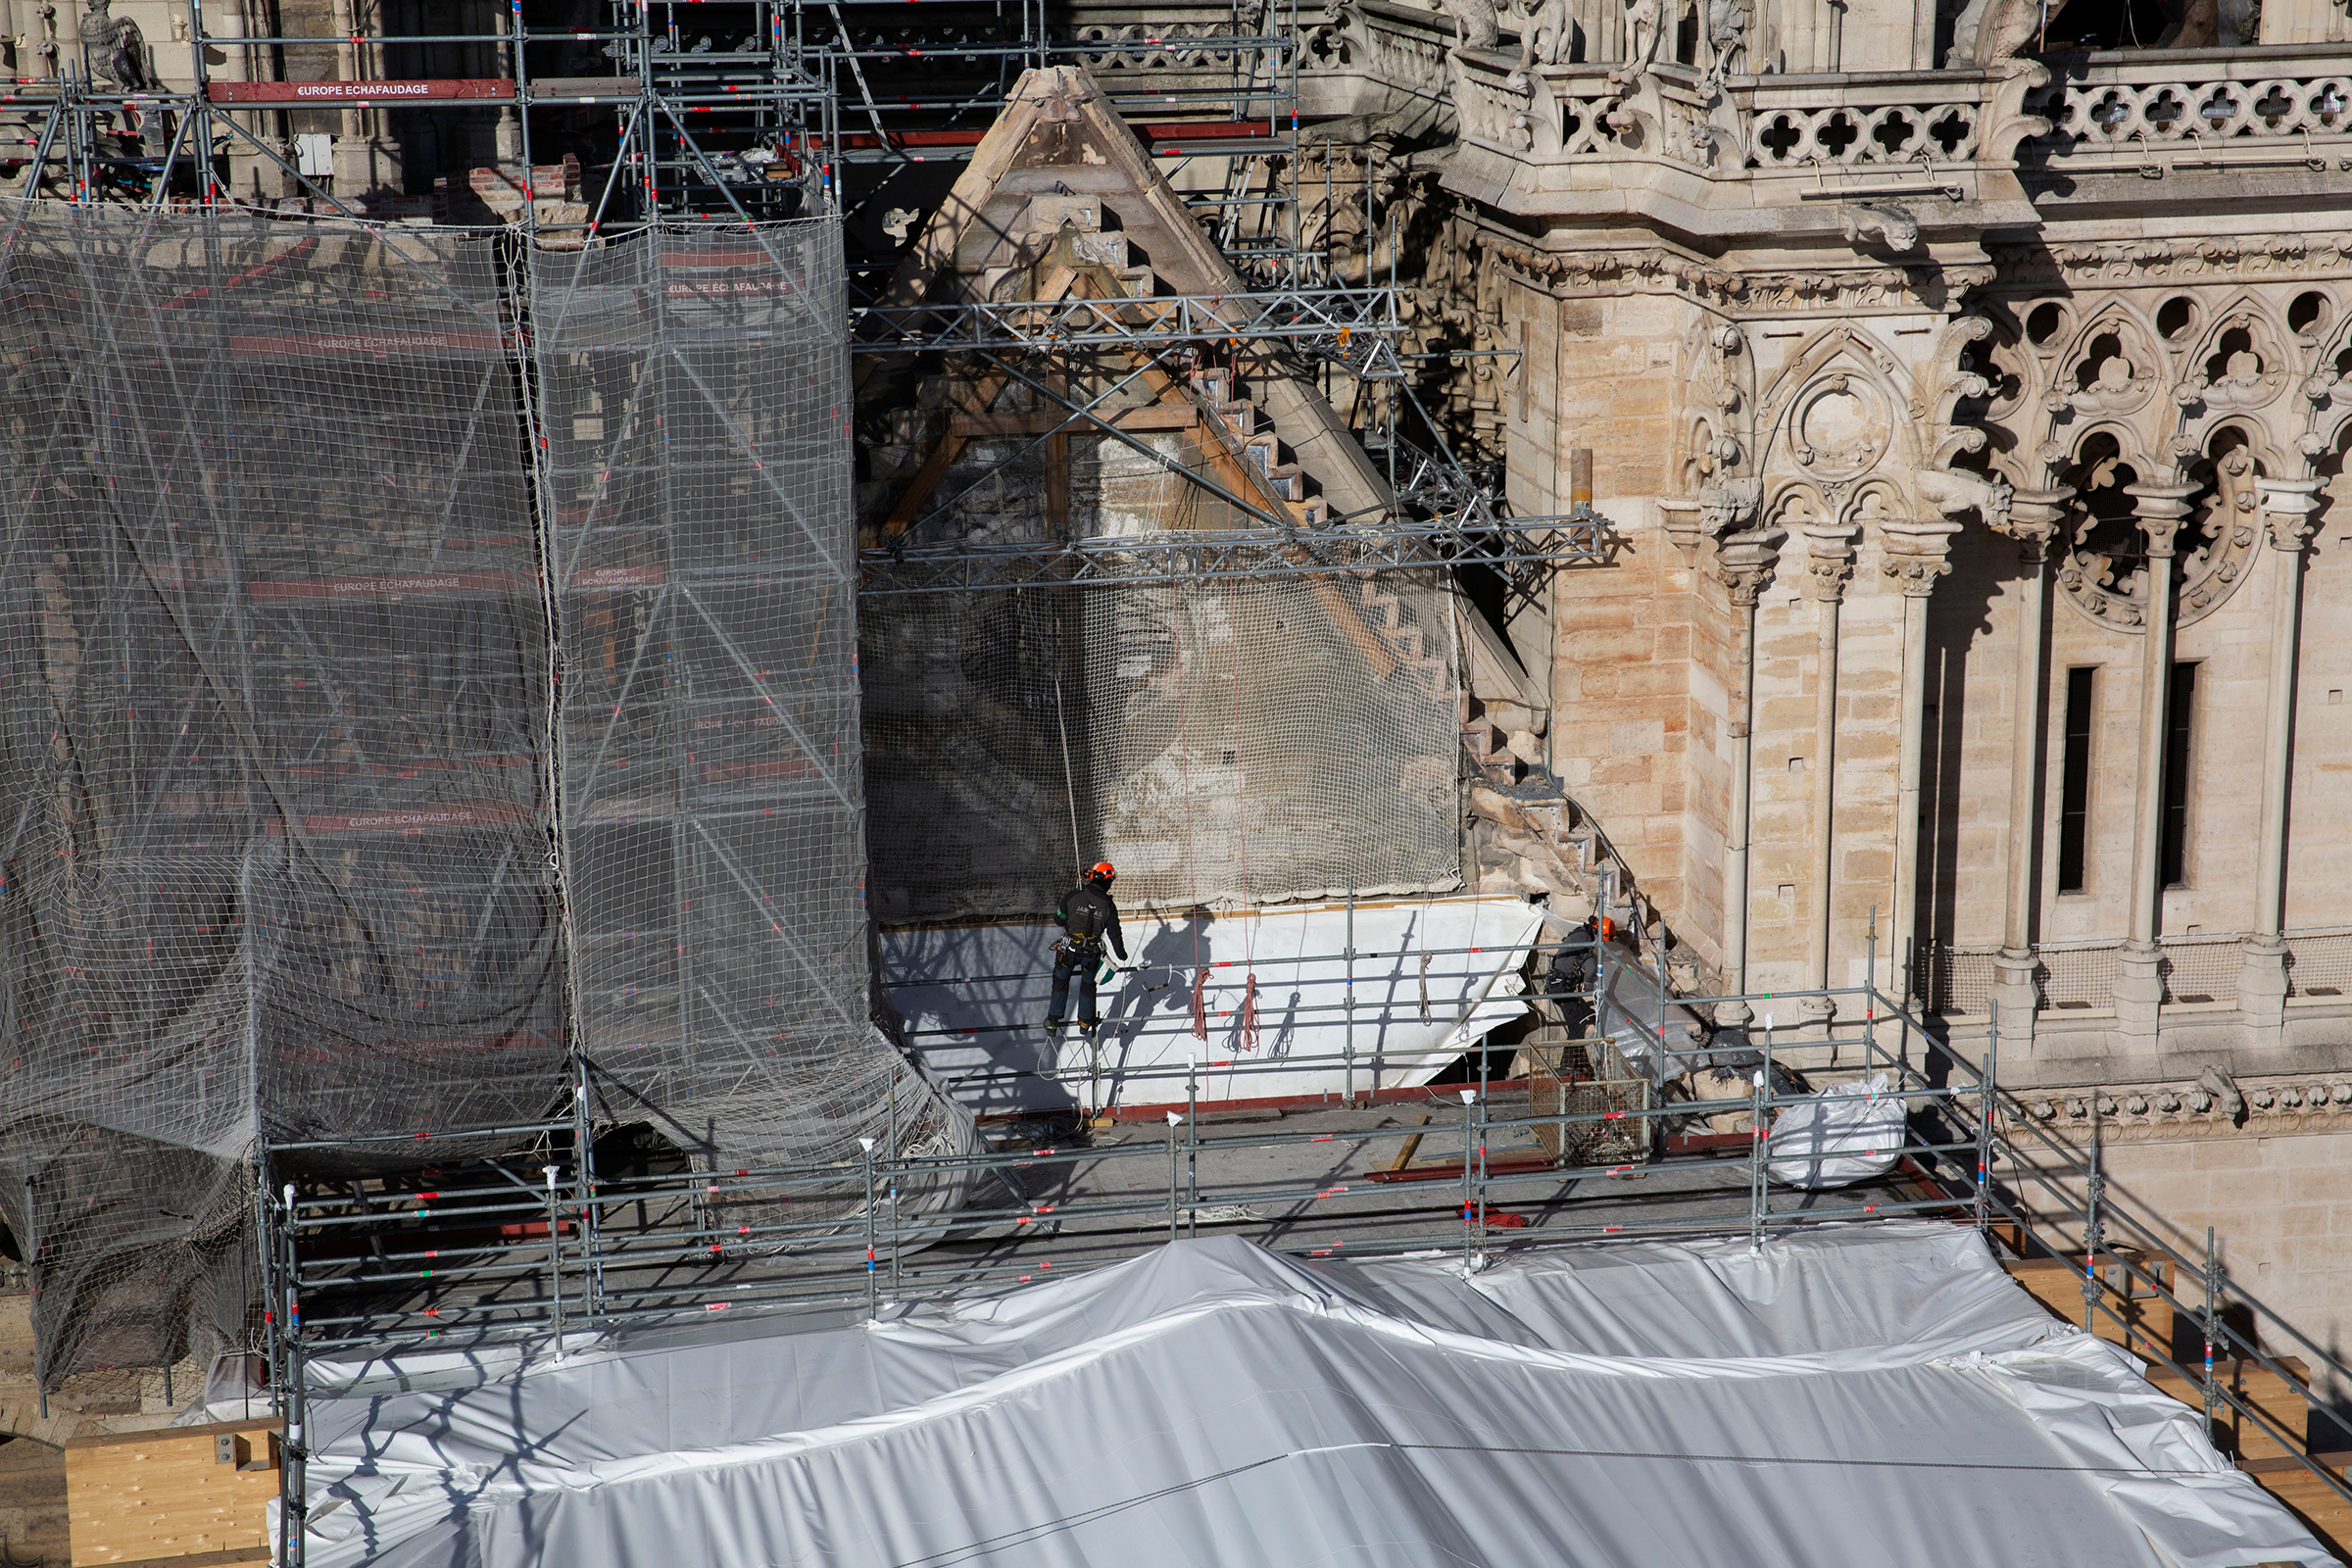 Macron's ambitious time frame for reopening Notre-Dame, seen in February, galvanized people into action and brought pledges of nearly a billion euros in donations for the reconstruction. (Patrick Zachmann—Magnum Photos for TIME)